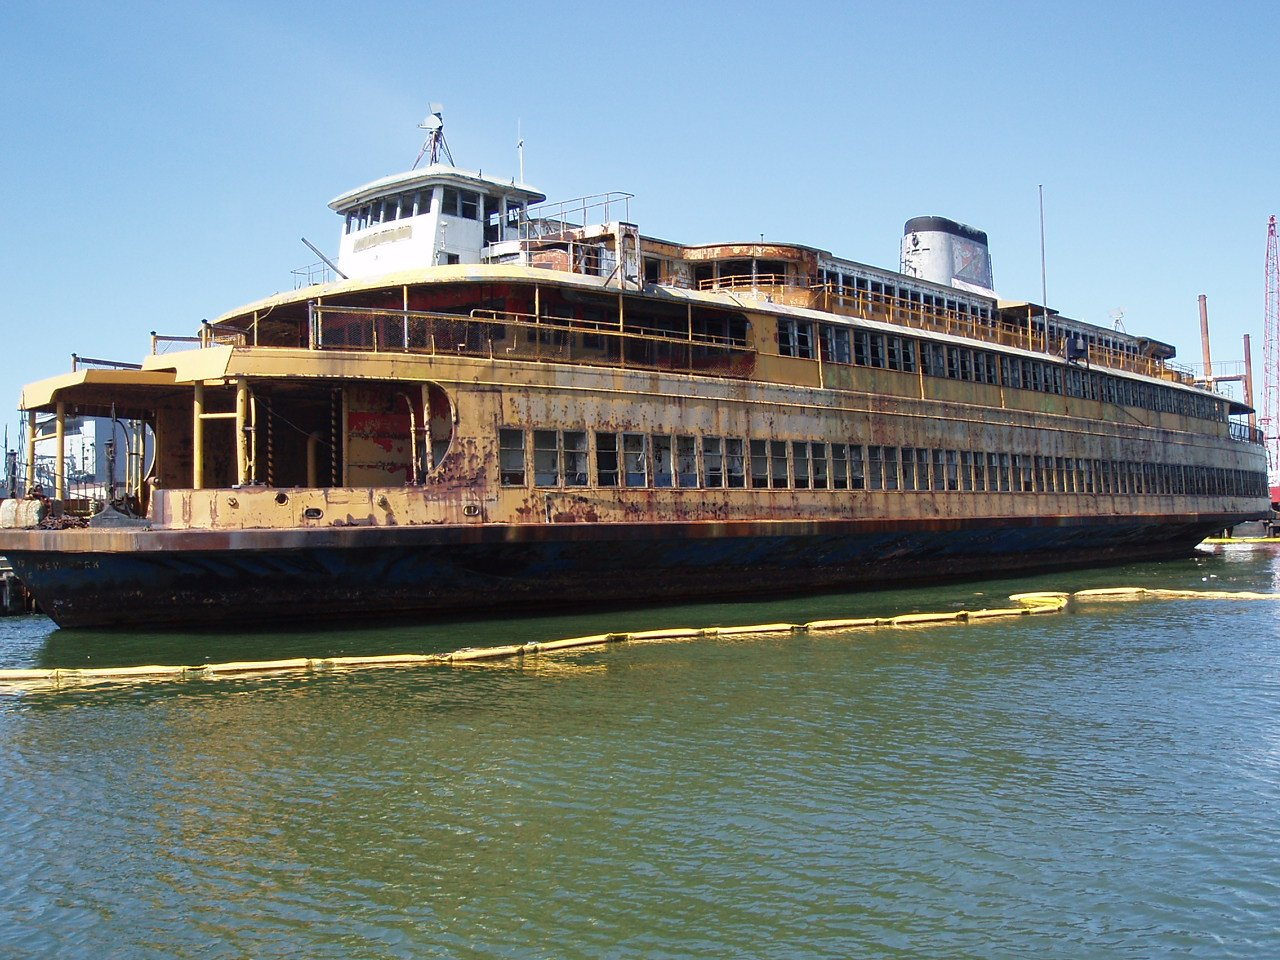 A deteriorating New York ferry boat